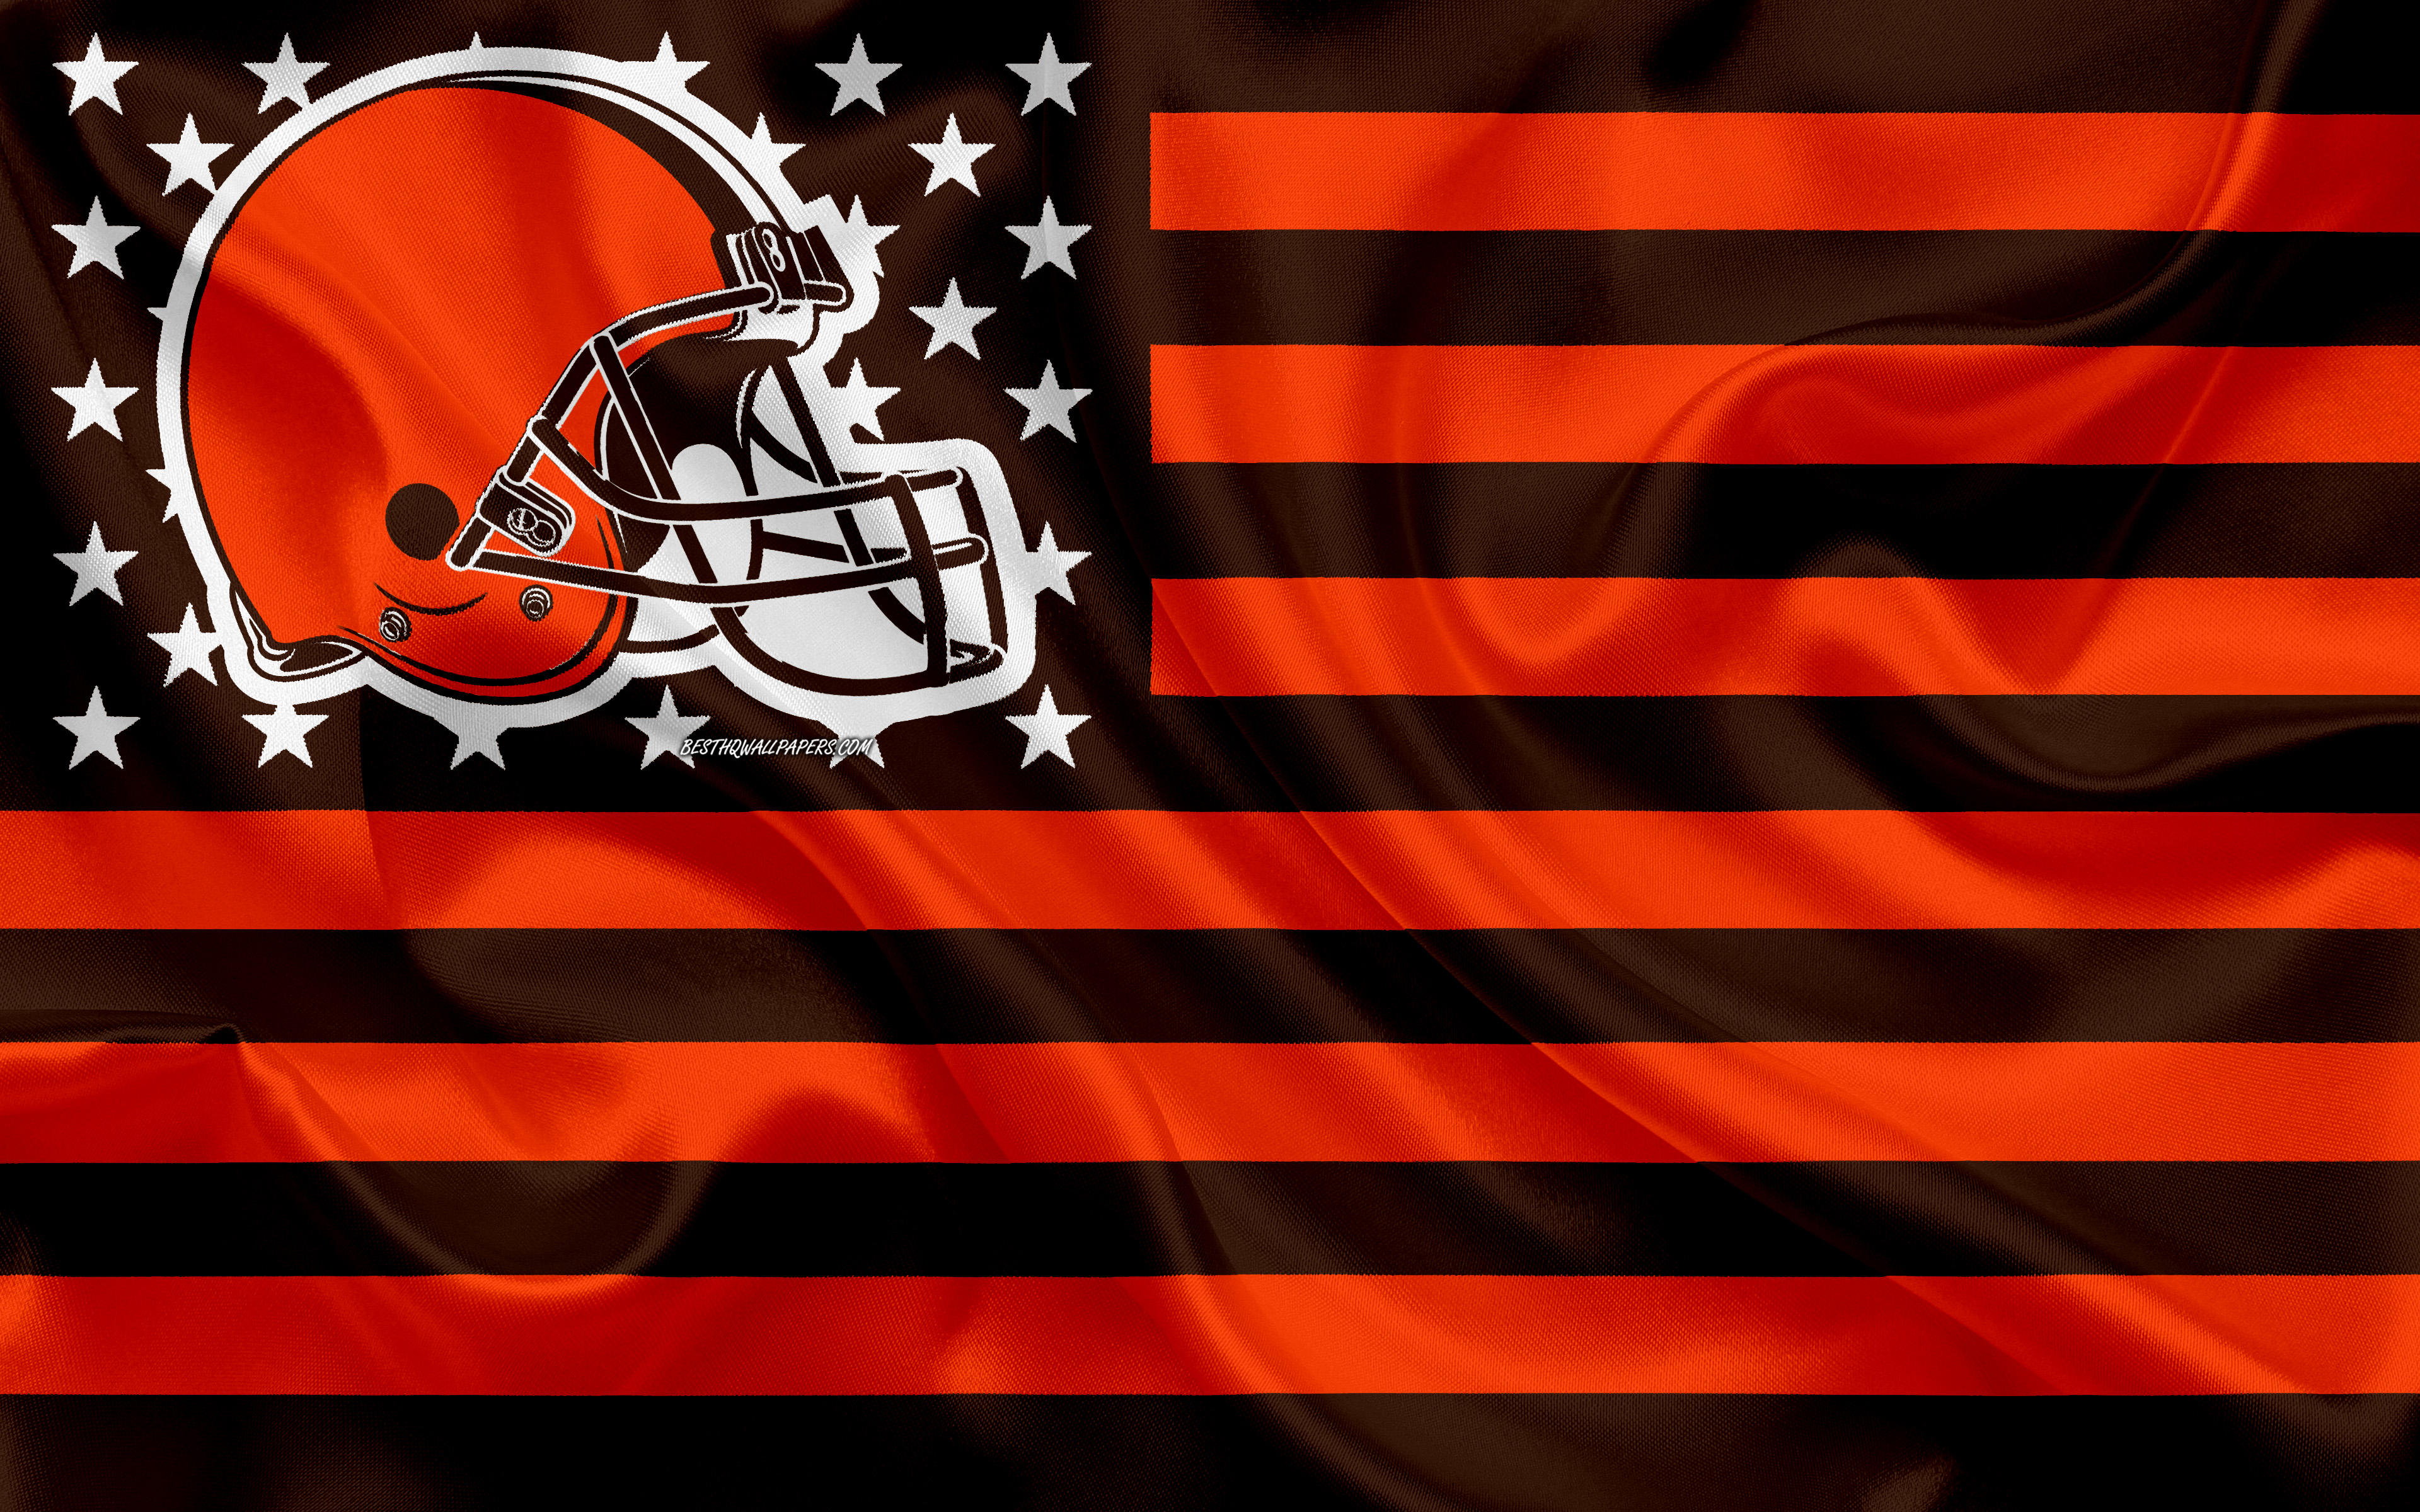 My Cleveland Browns wallpaper I just made  rBrowns